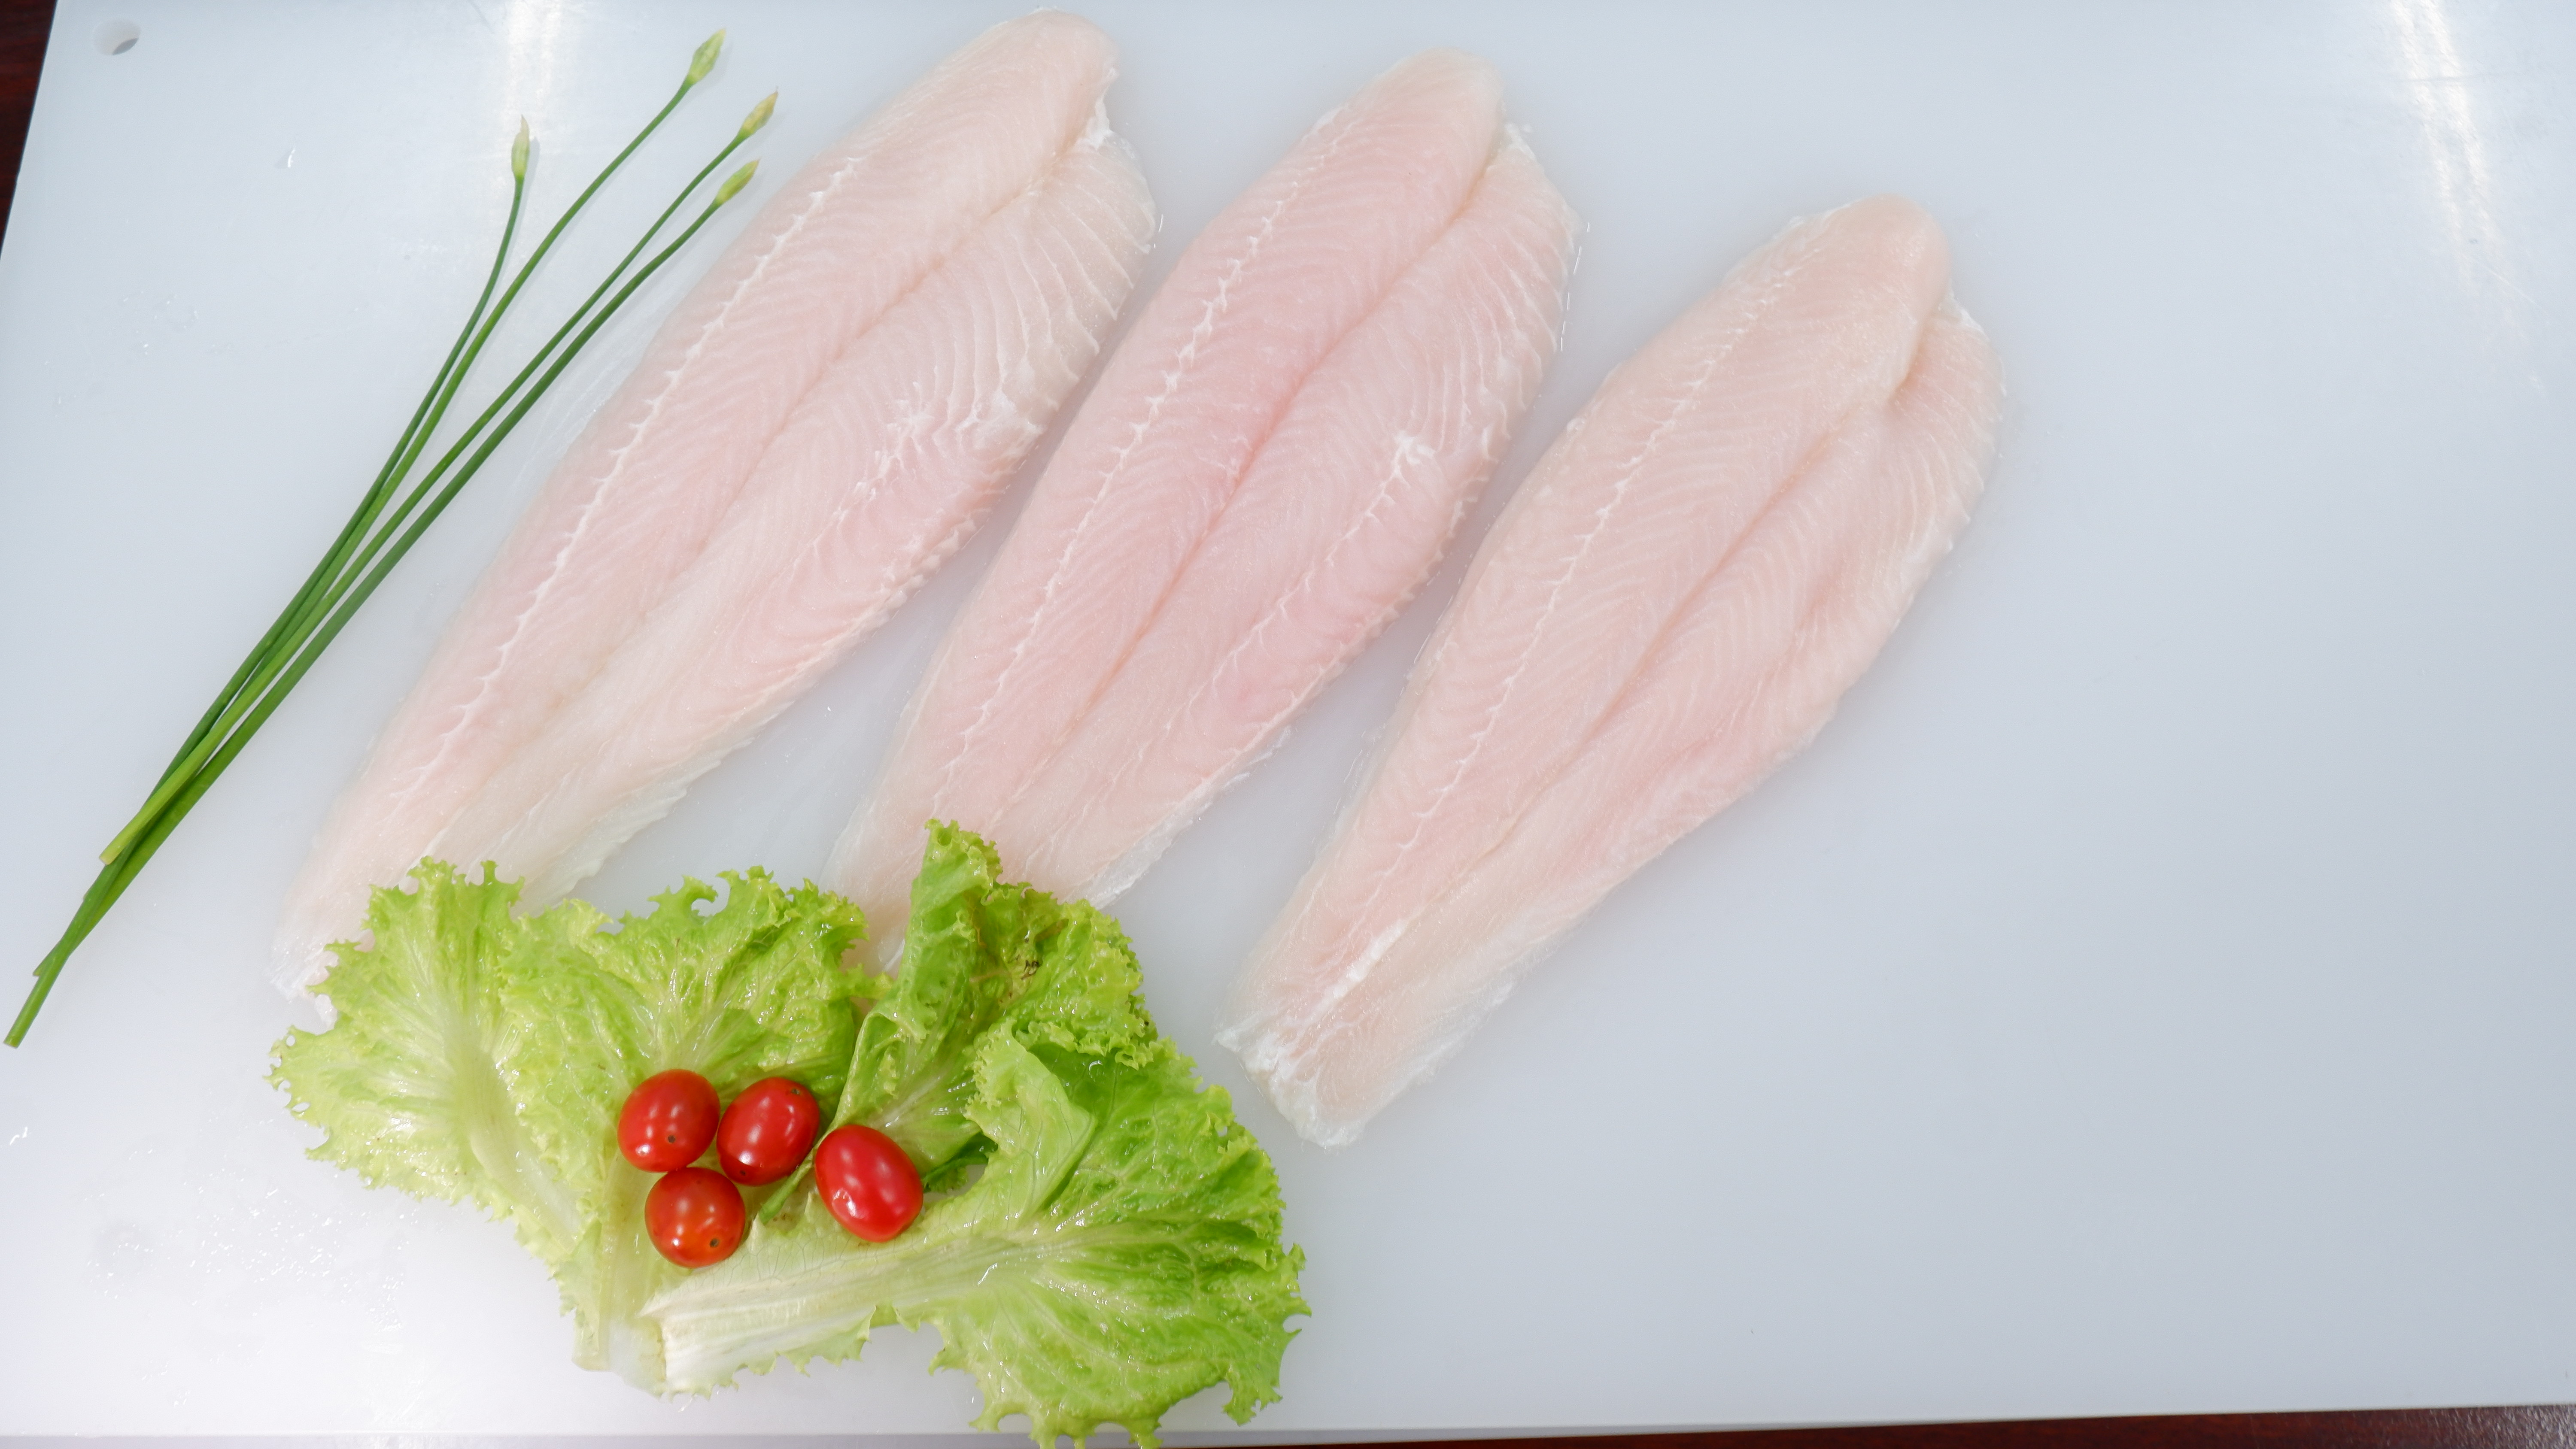 <span  class="uc_style_uc_tiles_grid_image_elementor_uc_items_attribute_title" style="color:#ffffff;">Pangasius Fillet Well-trimmed</span>